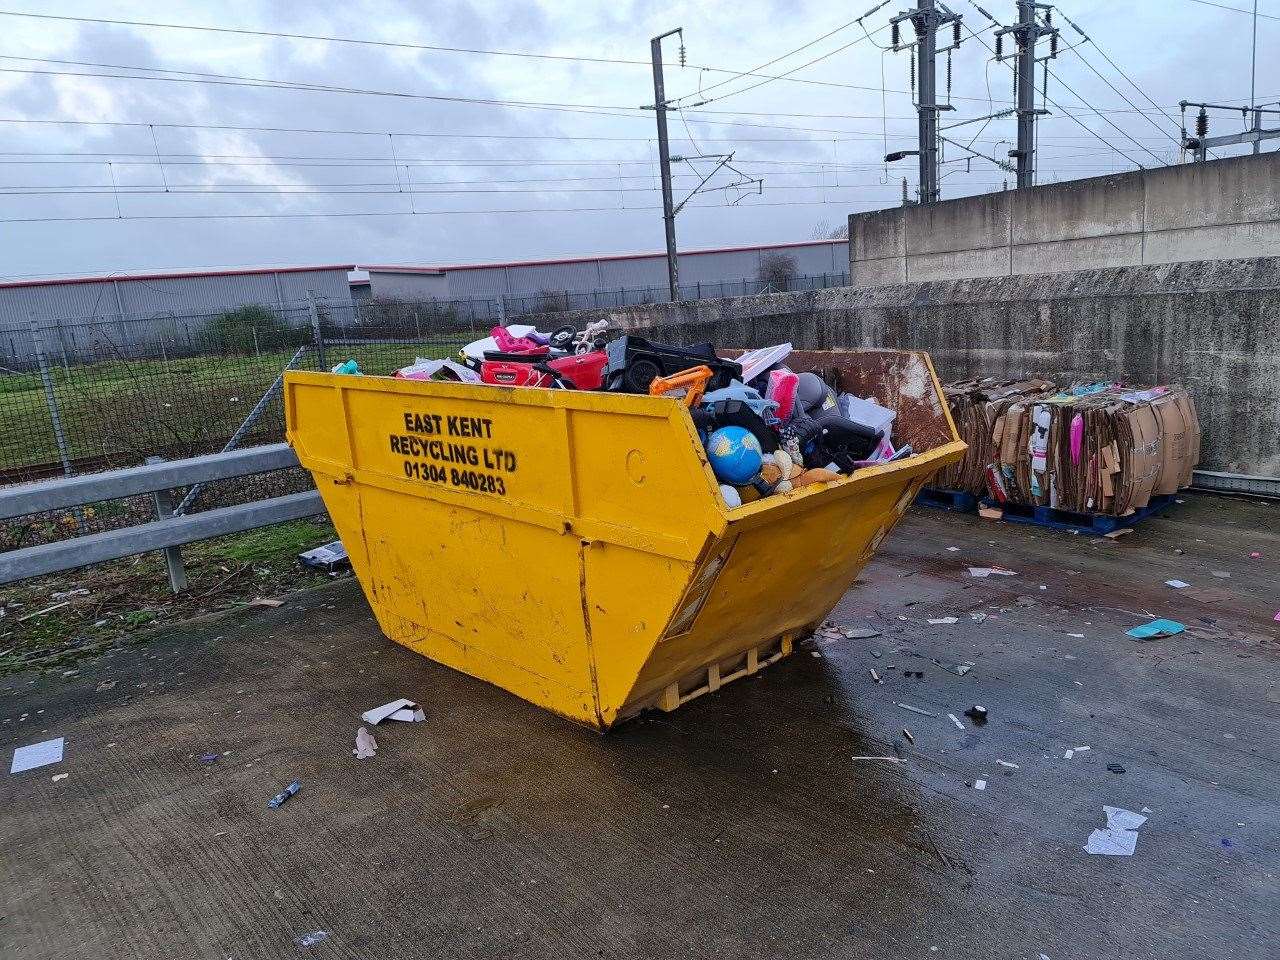 A full-time dumpster diver from East Malling claims he makes thousands of pounds hauling retail outlets bins. Picture: SWNS